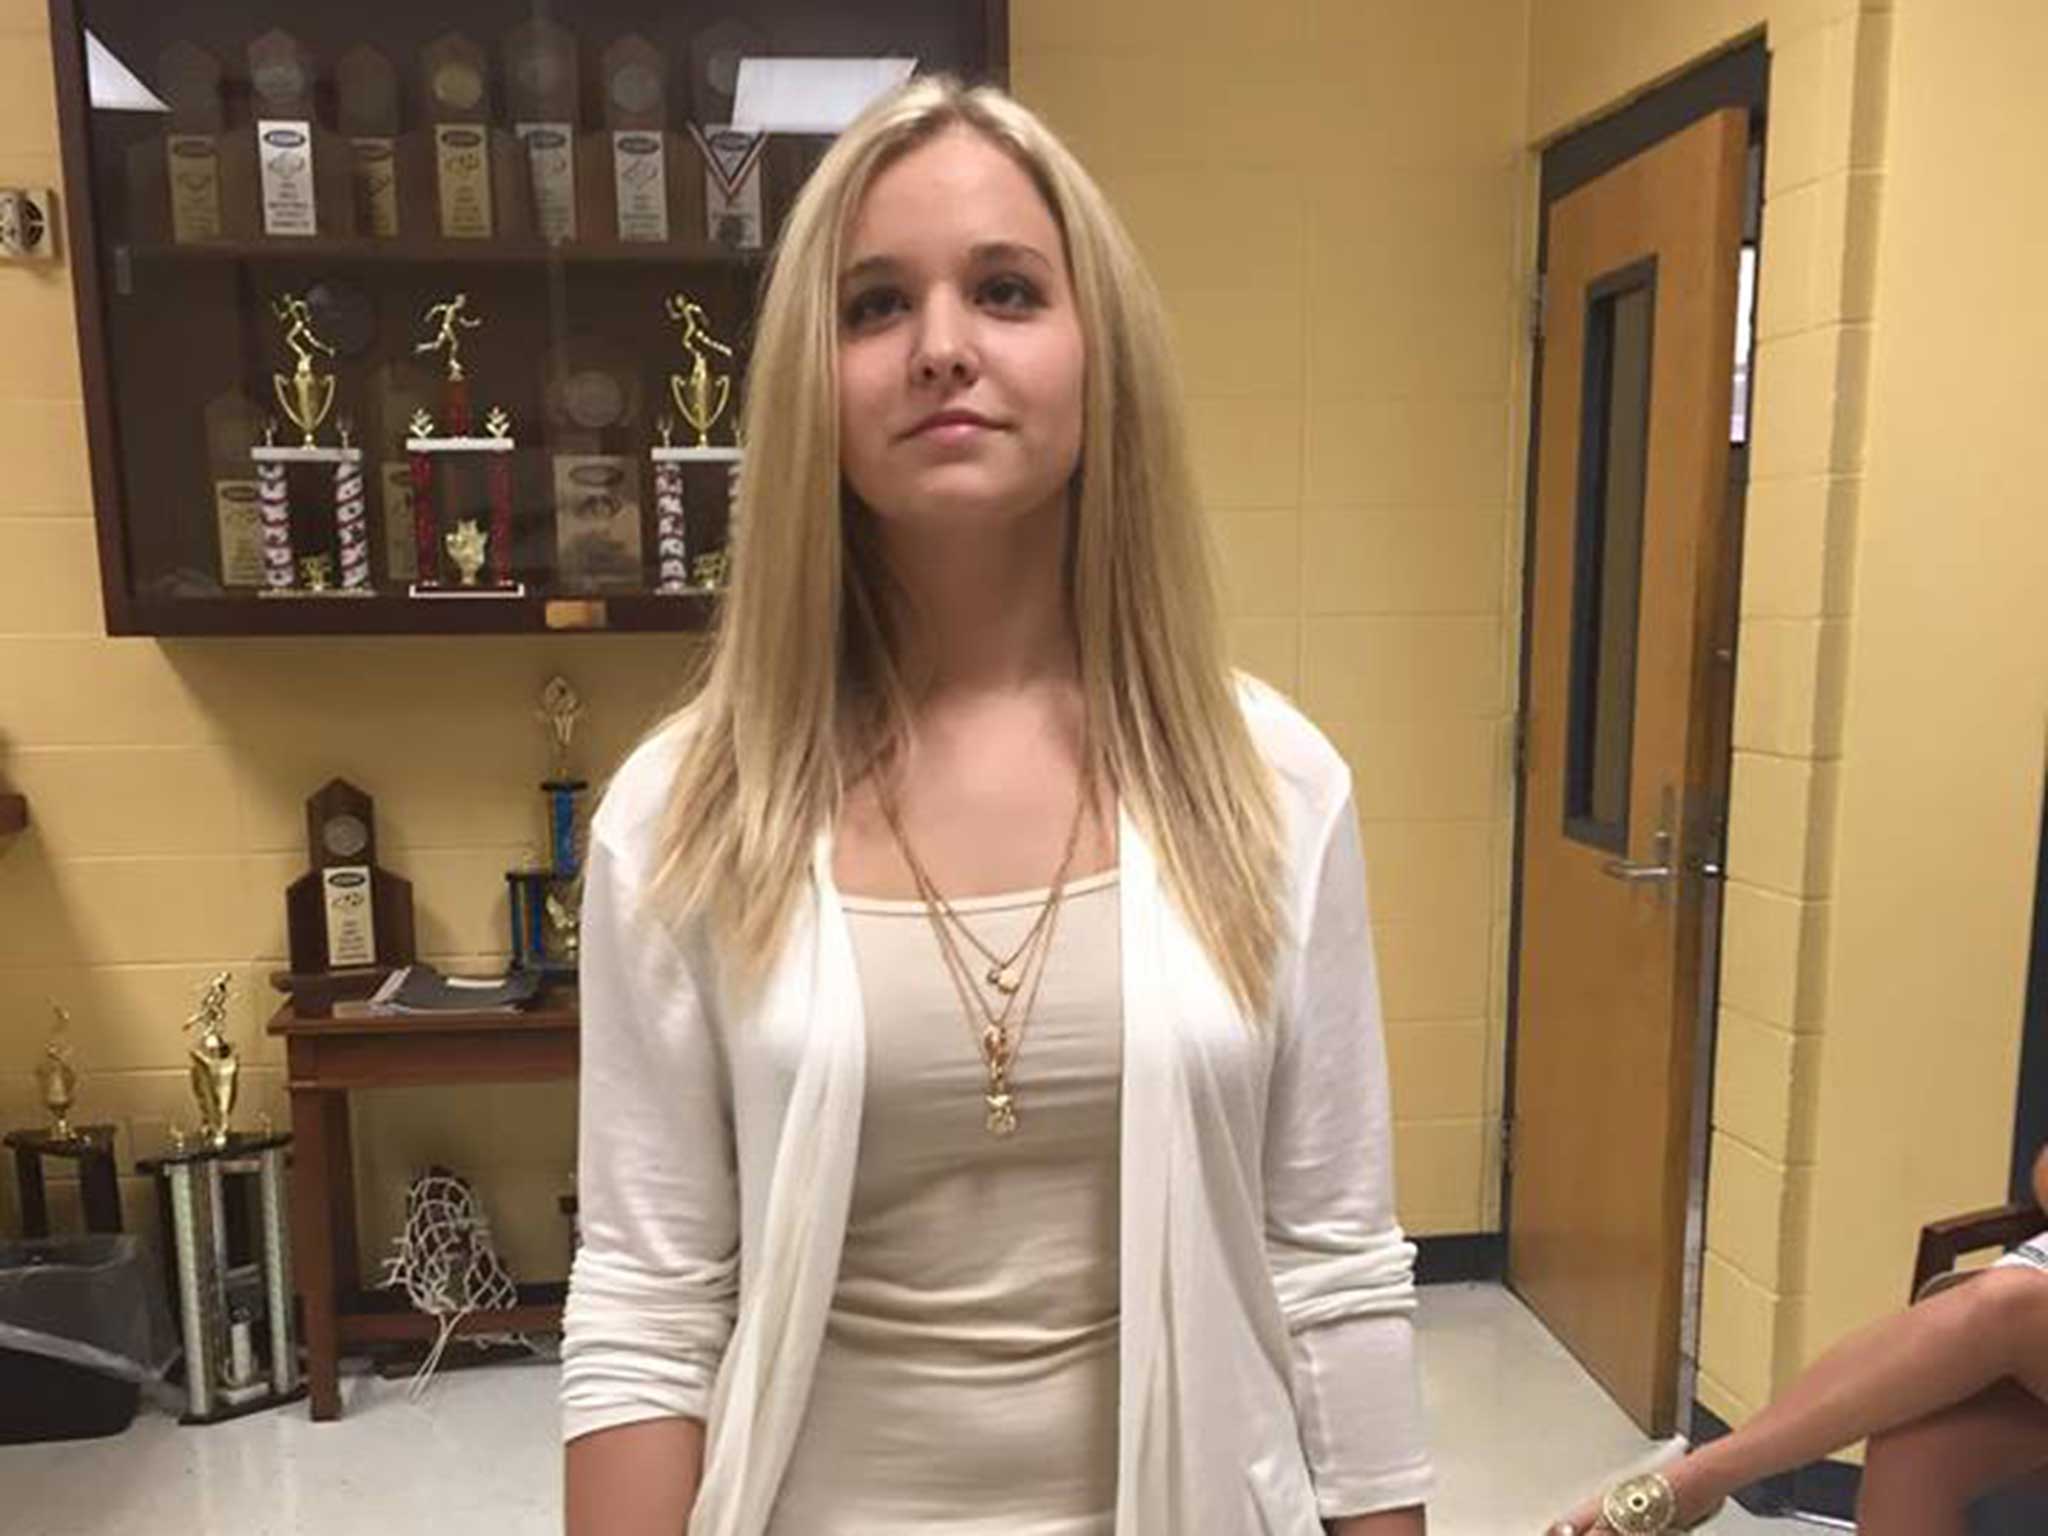 Teenage Girl Sent Home For Violating School Dress Code By Showing Her 